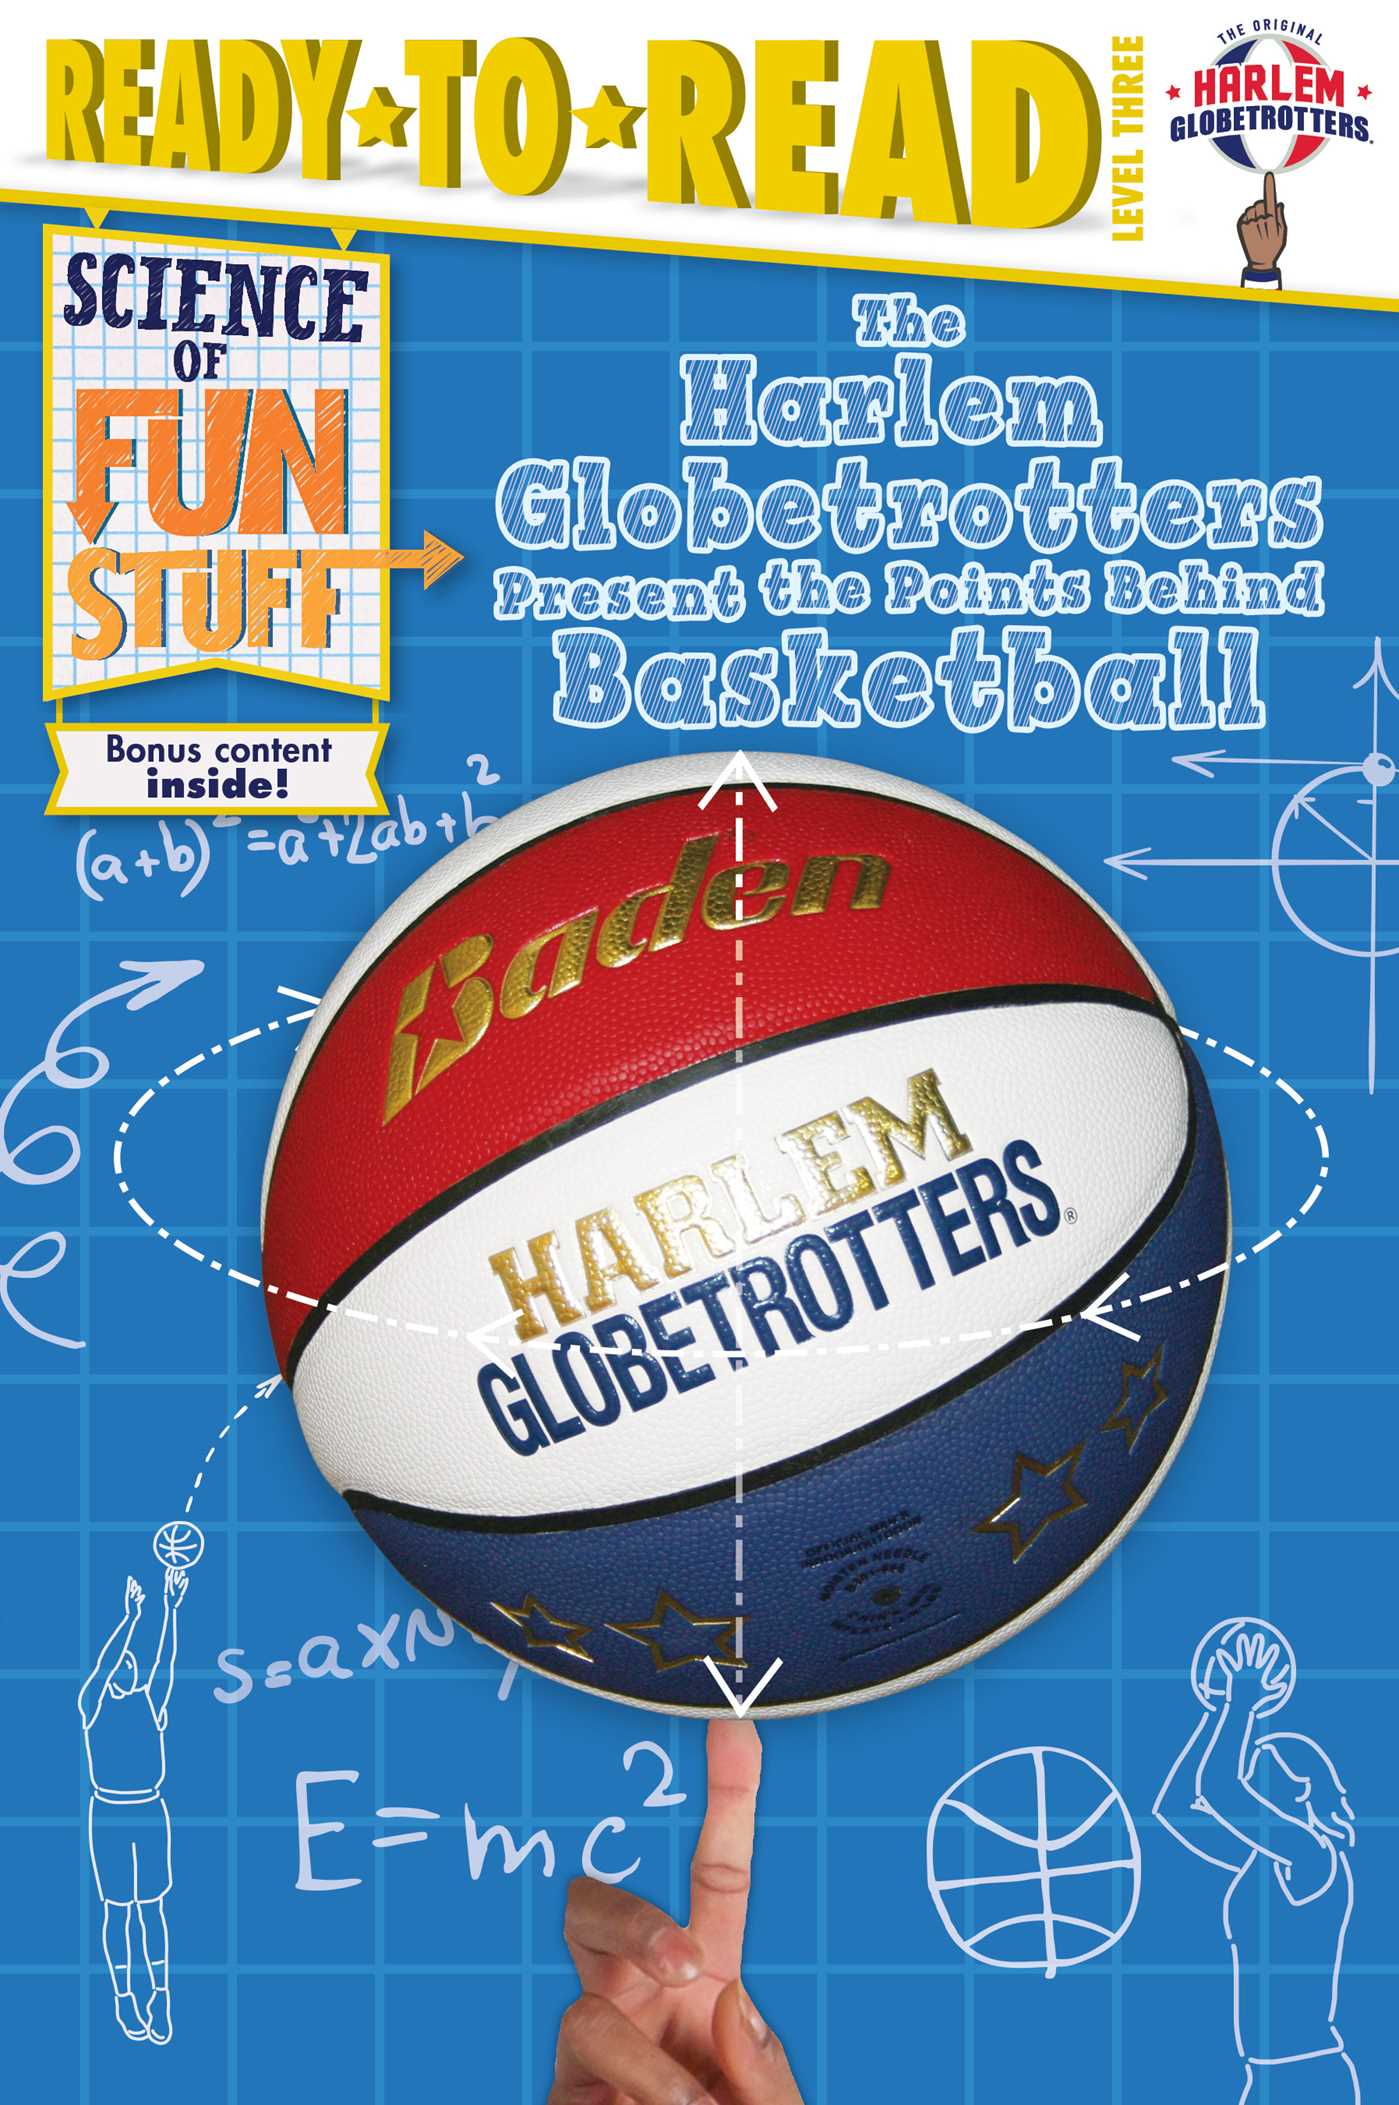 The Harlem Globetrotters Present the Points Behind Basketball : Ready-to-Read Level 3 | Documentary